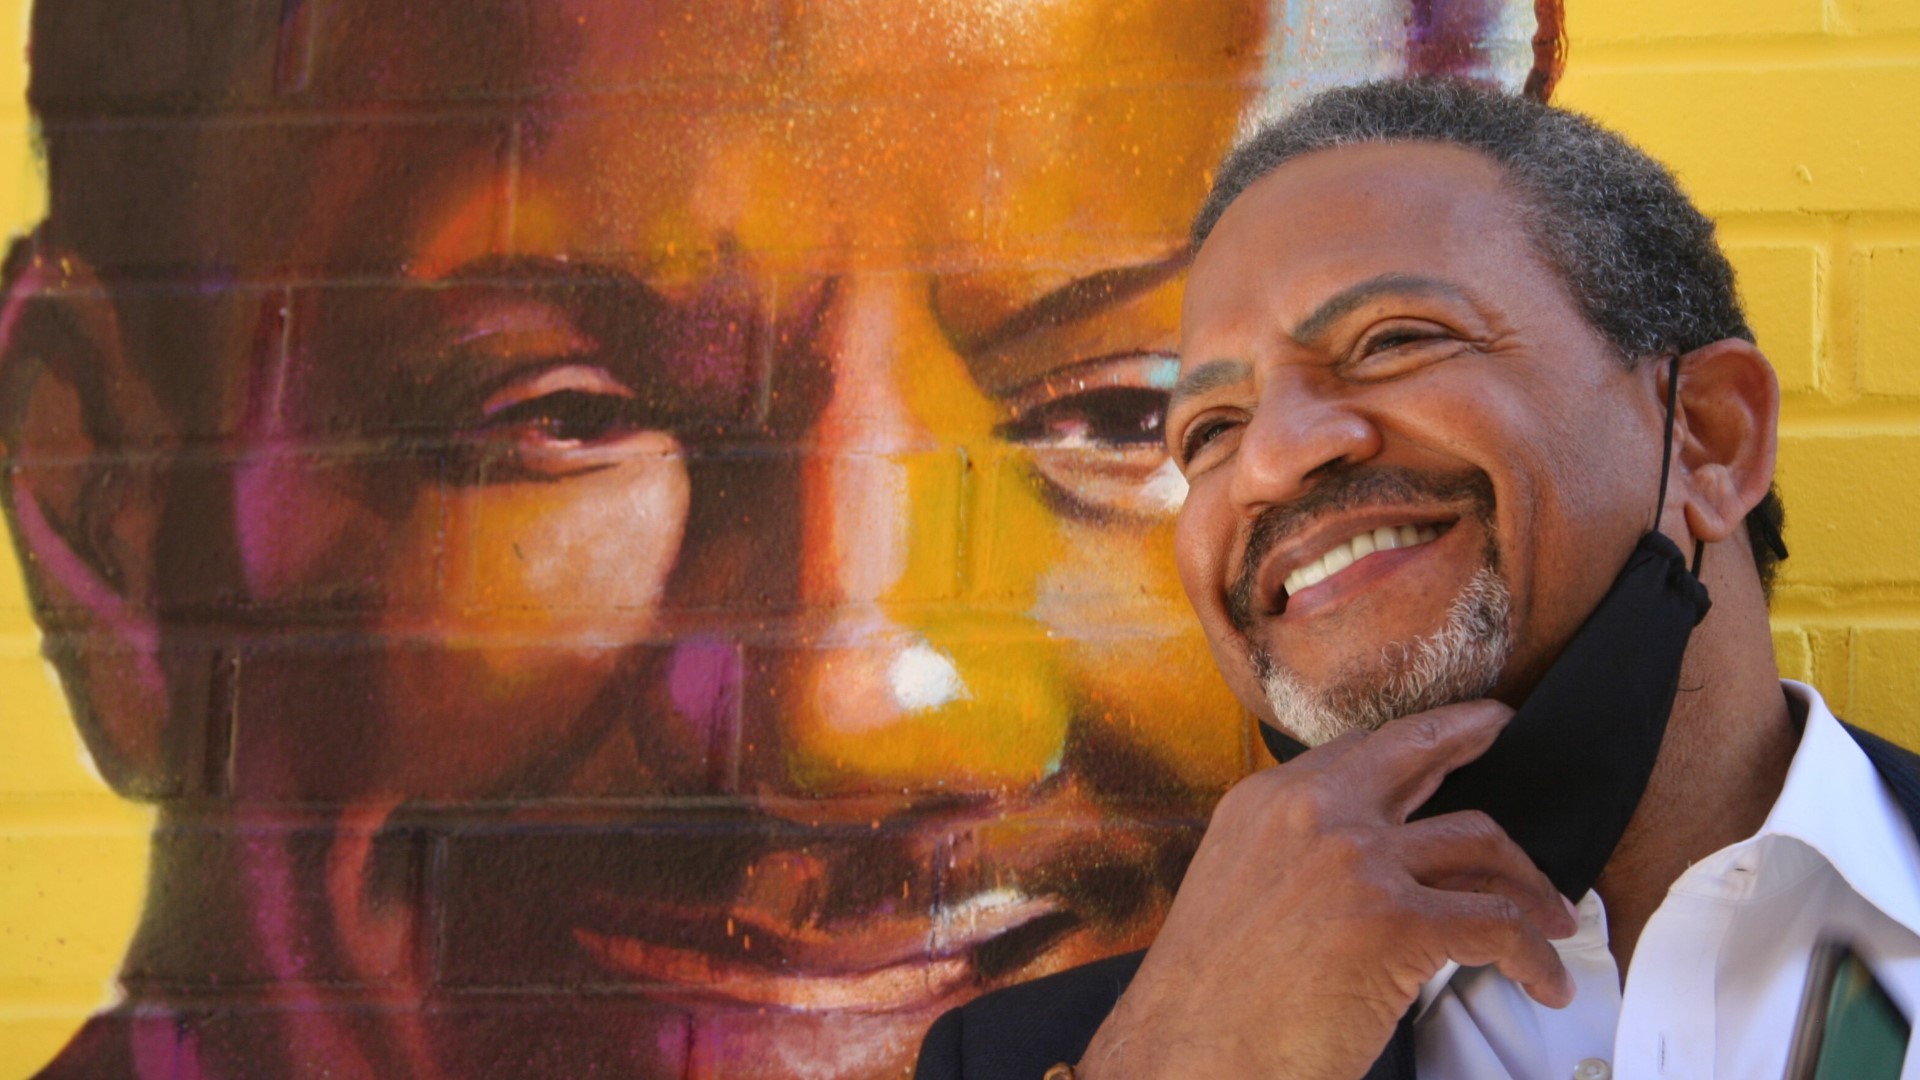 WUSA9's Bruce Johnson is honored with a spot on the mural outside of Ben's Chili Bowl in Washington, D.C.